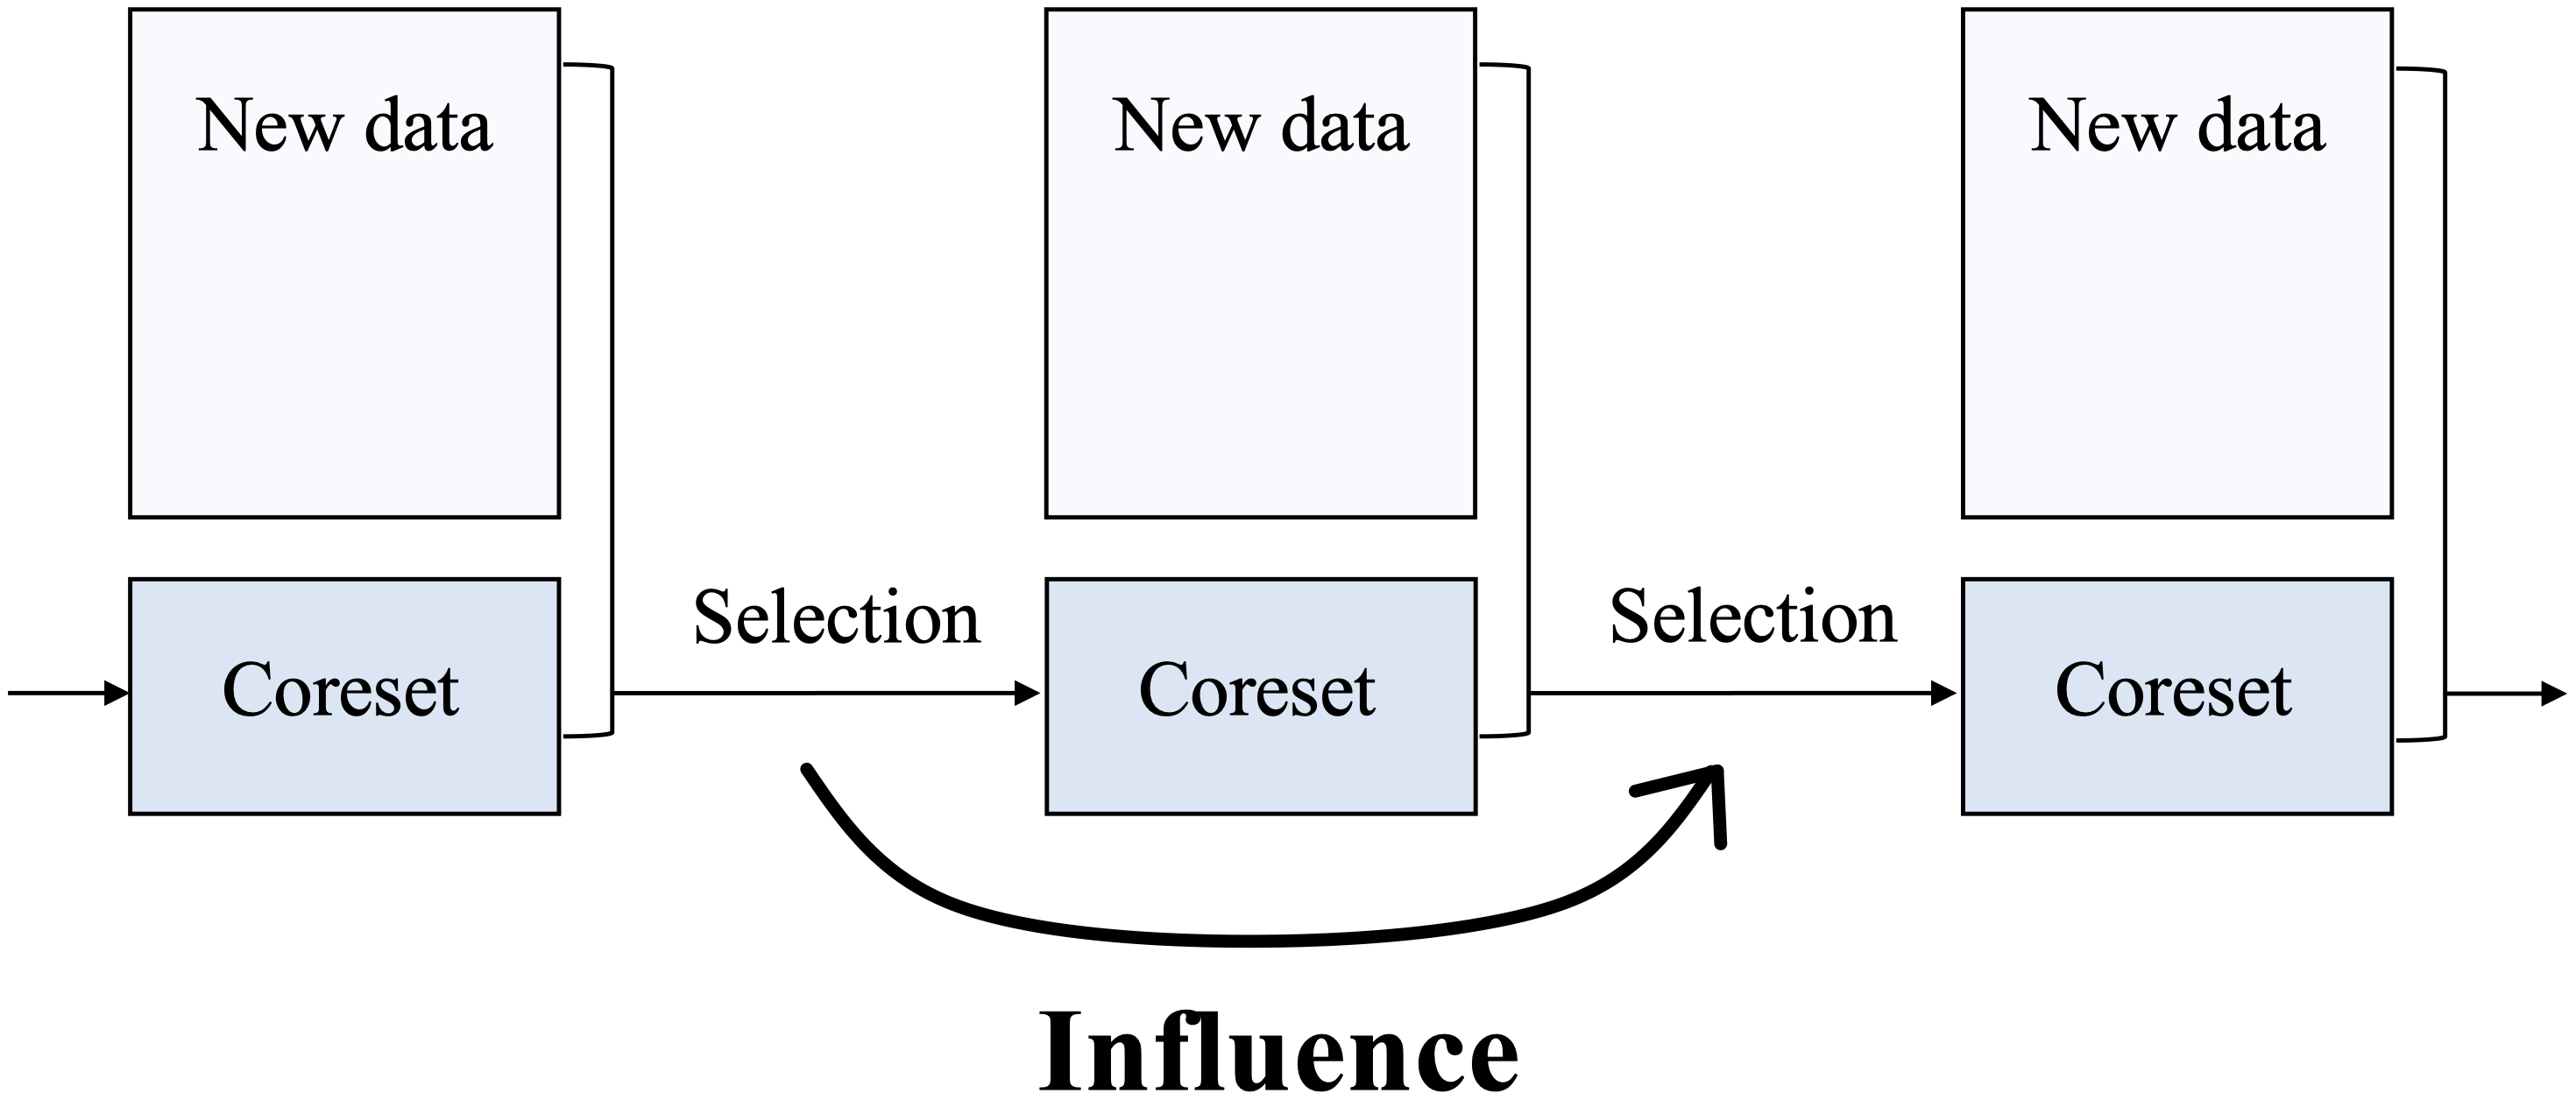 Coreset selection process in continual learning